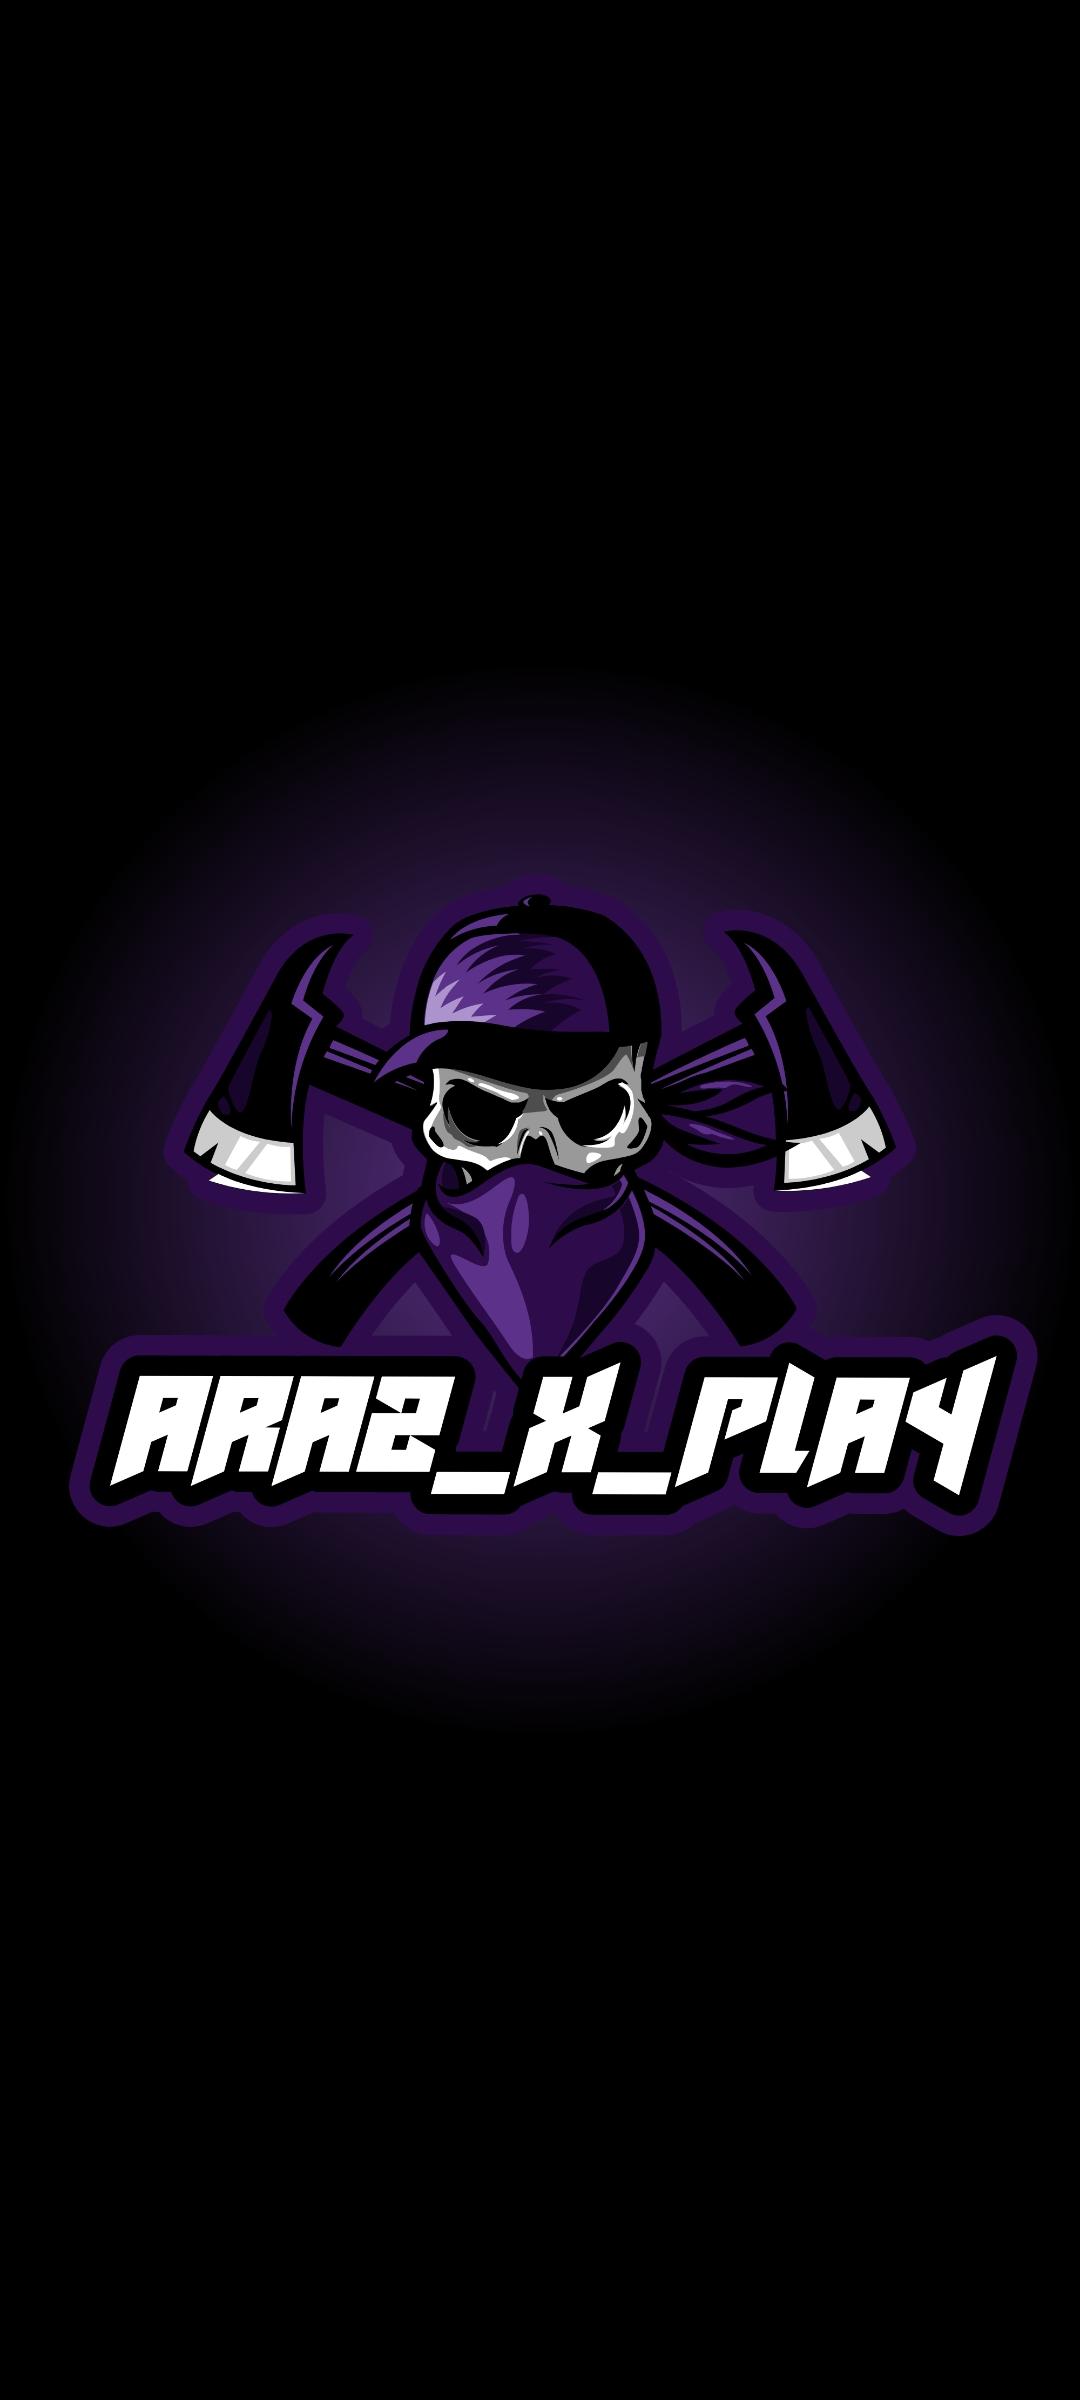 araz_x_play's Profile Picture In GameUP